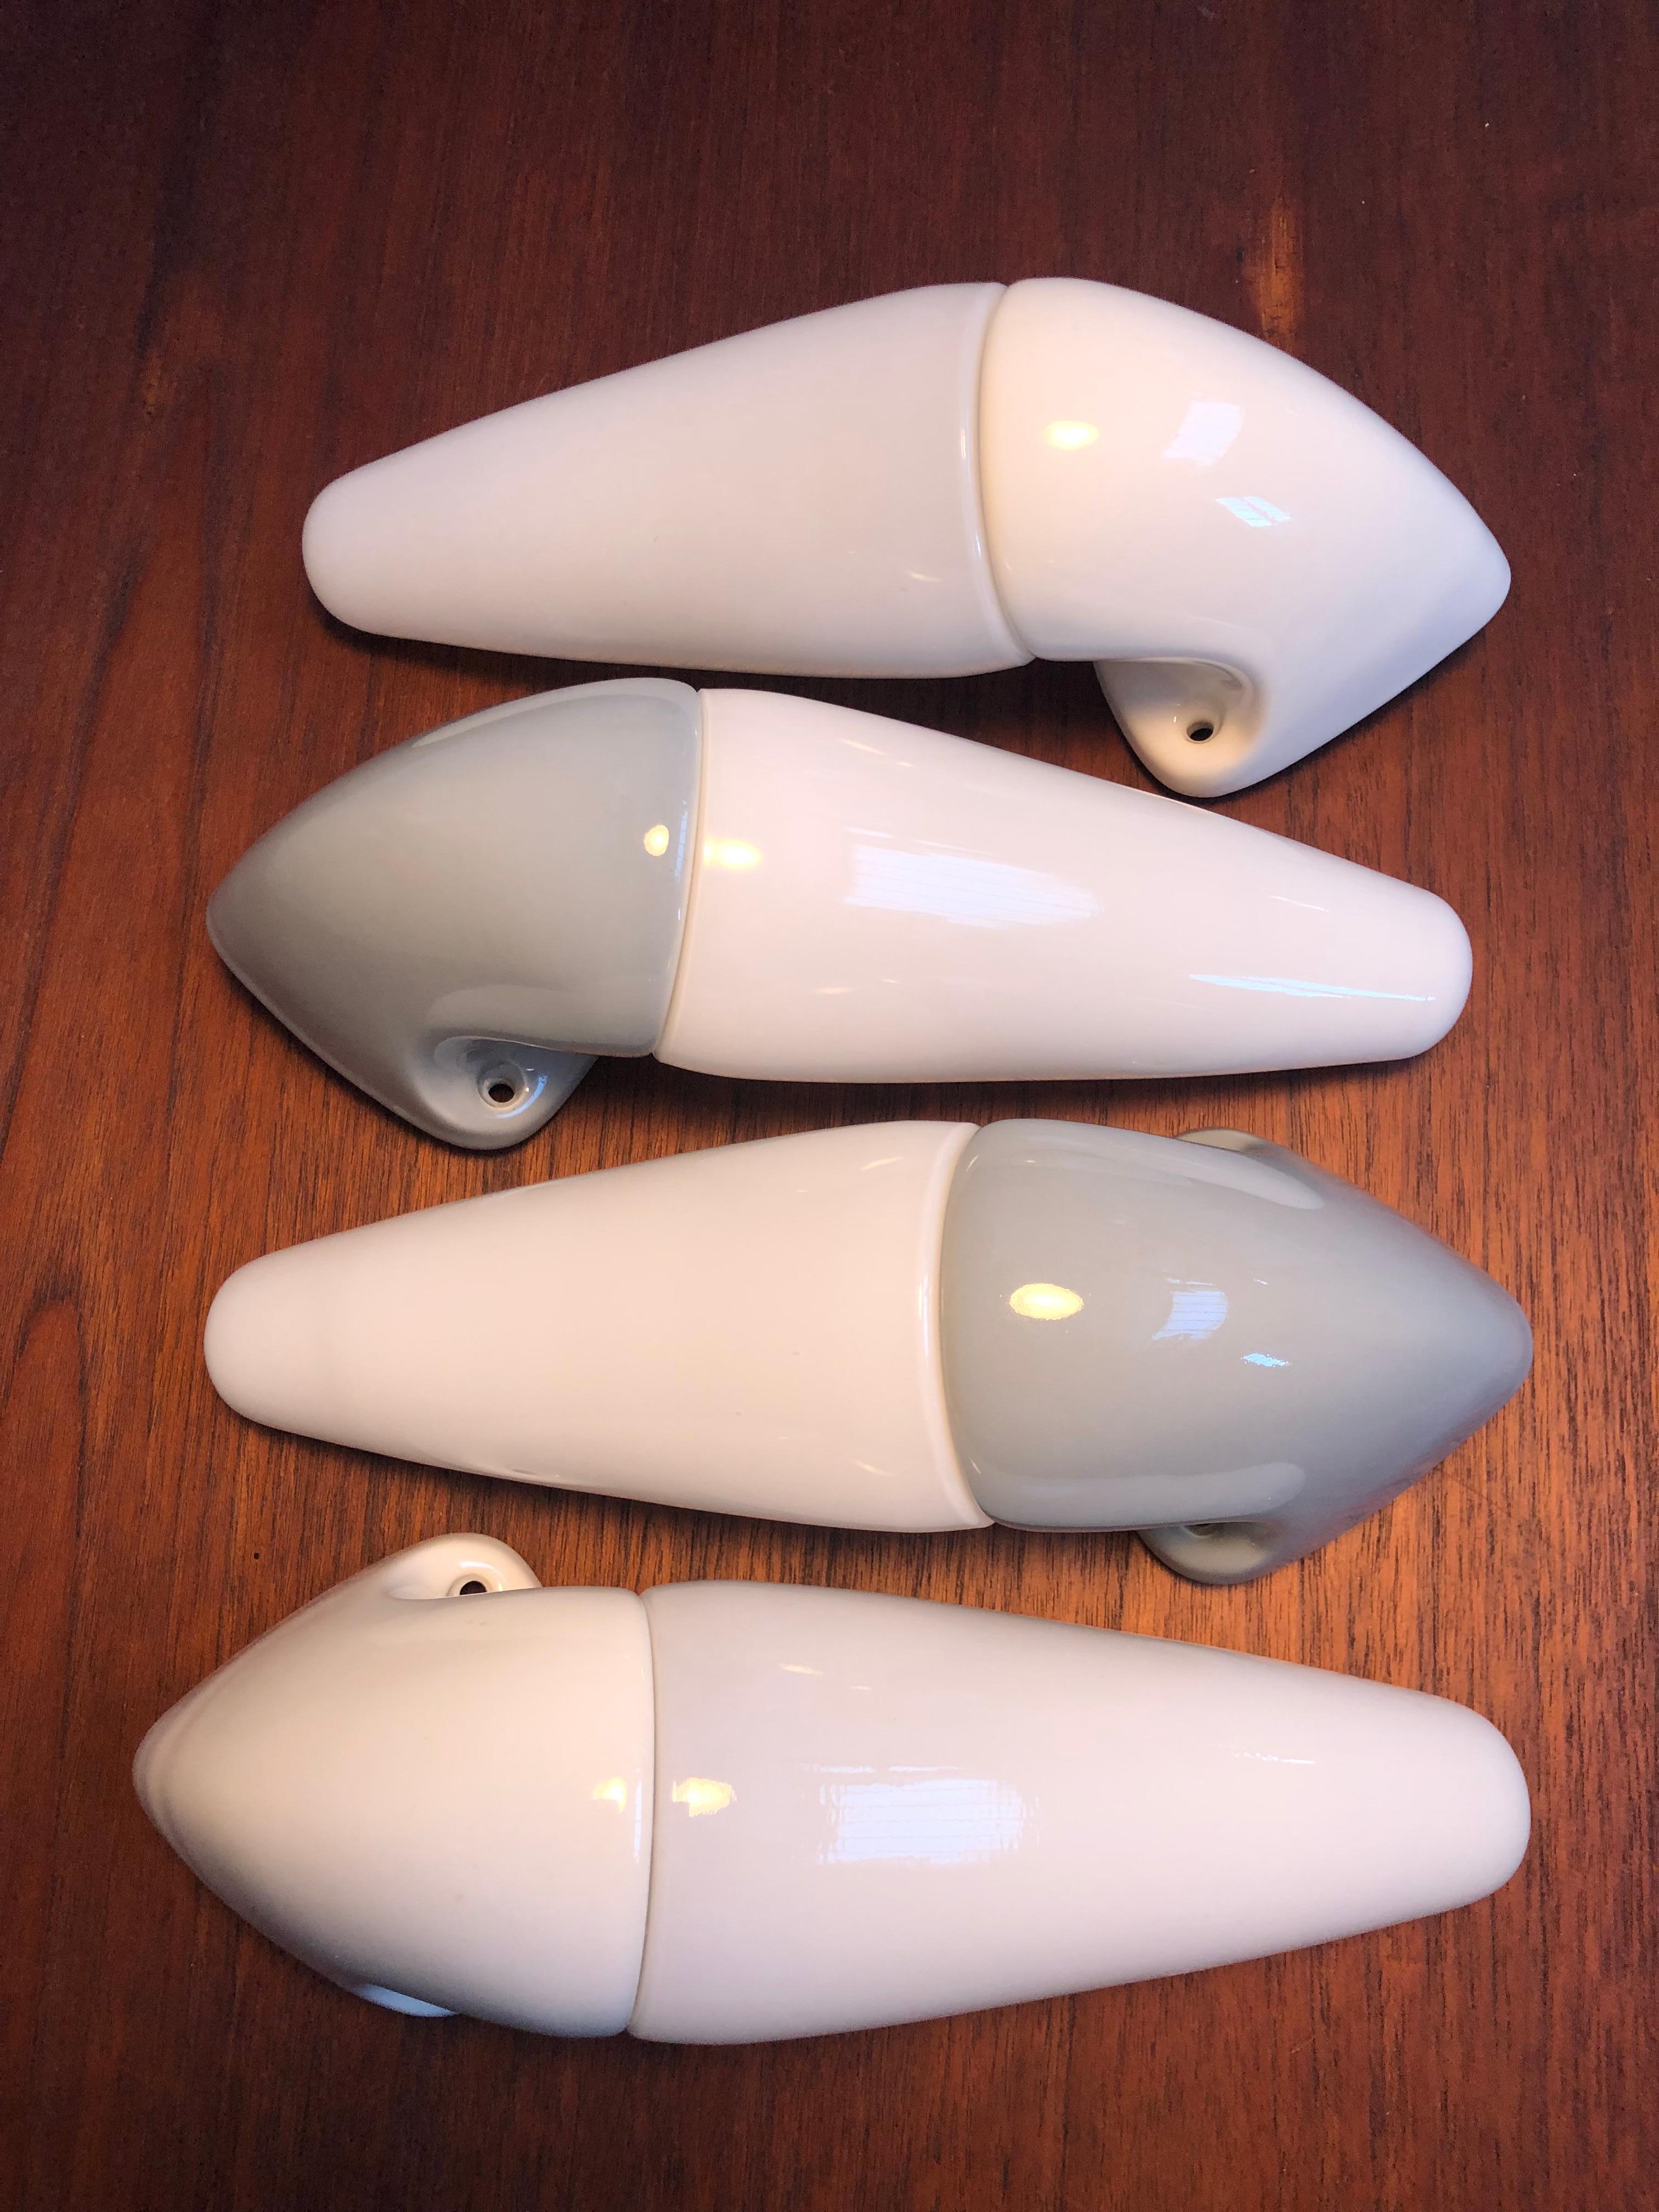 Mid-20th Century Vintage Ifö of Sweden Ceramic Bathroom Lamps with Opaline Shades from the 1960s For Sale